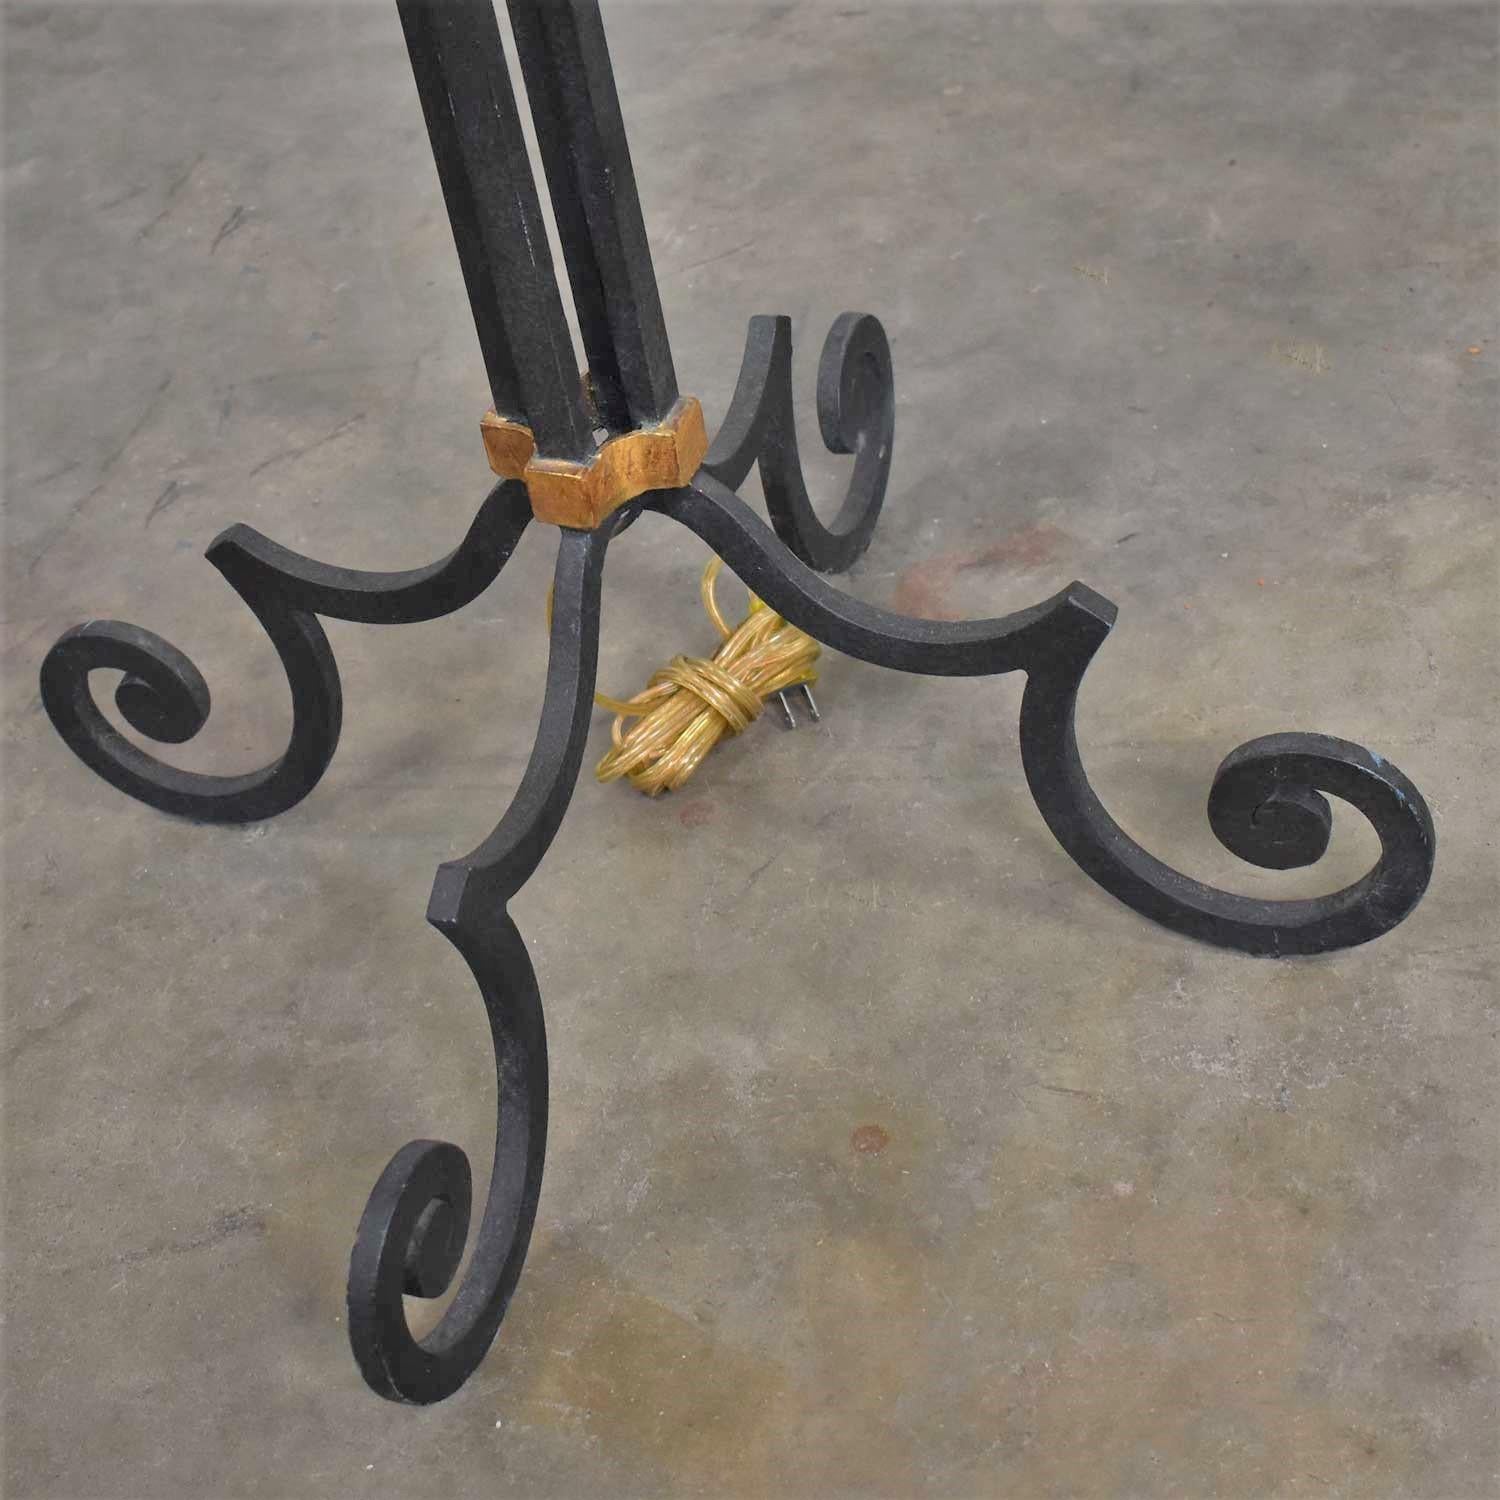 Monumental Neoclassical Iron Floor Lamp Acanthus Leaf Design & Parchment Shade For Sale 9